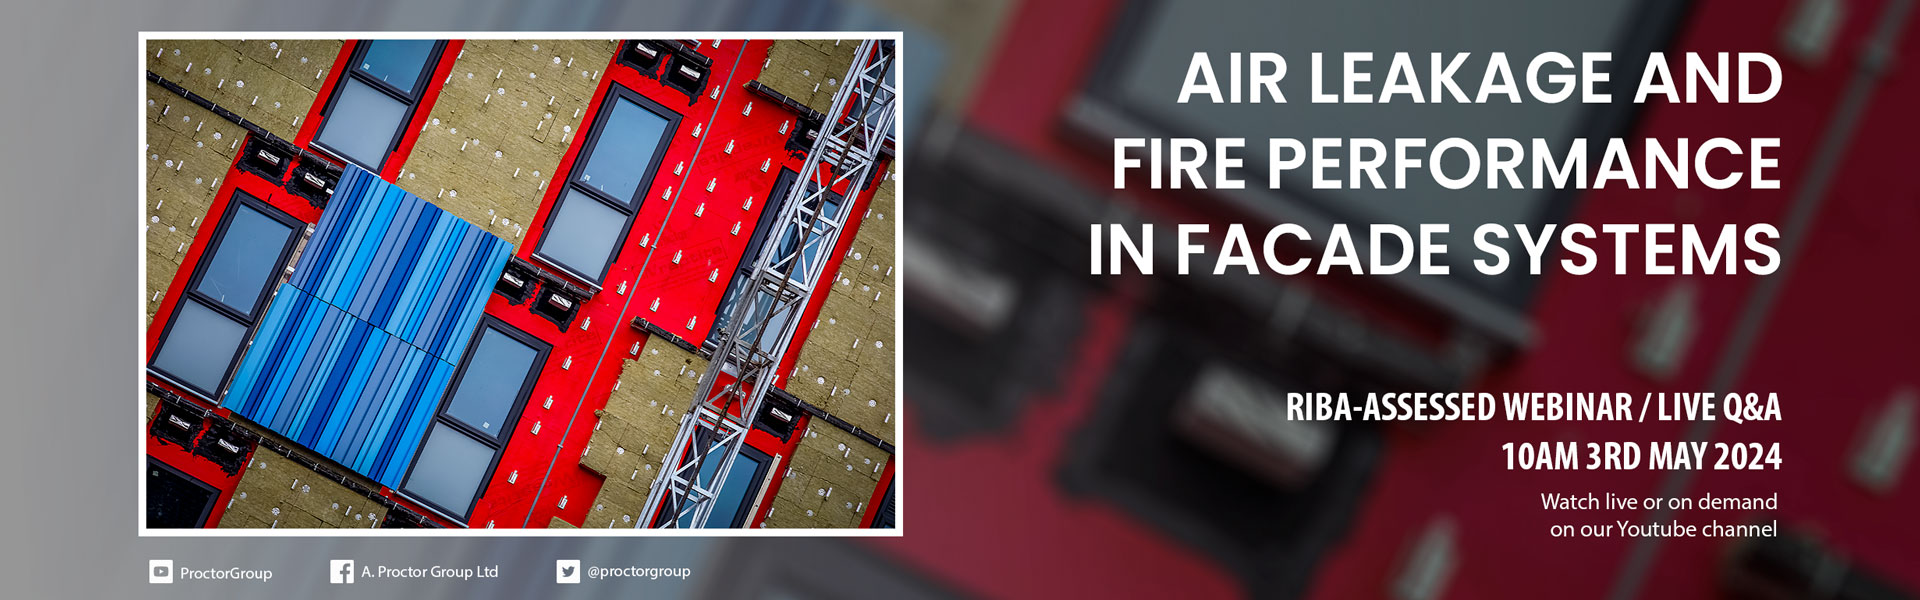 Air Leakage and Fire Performance in Facade Systems